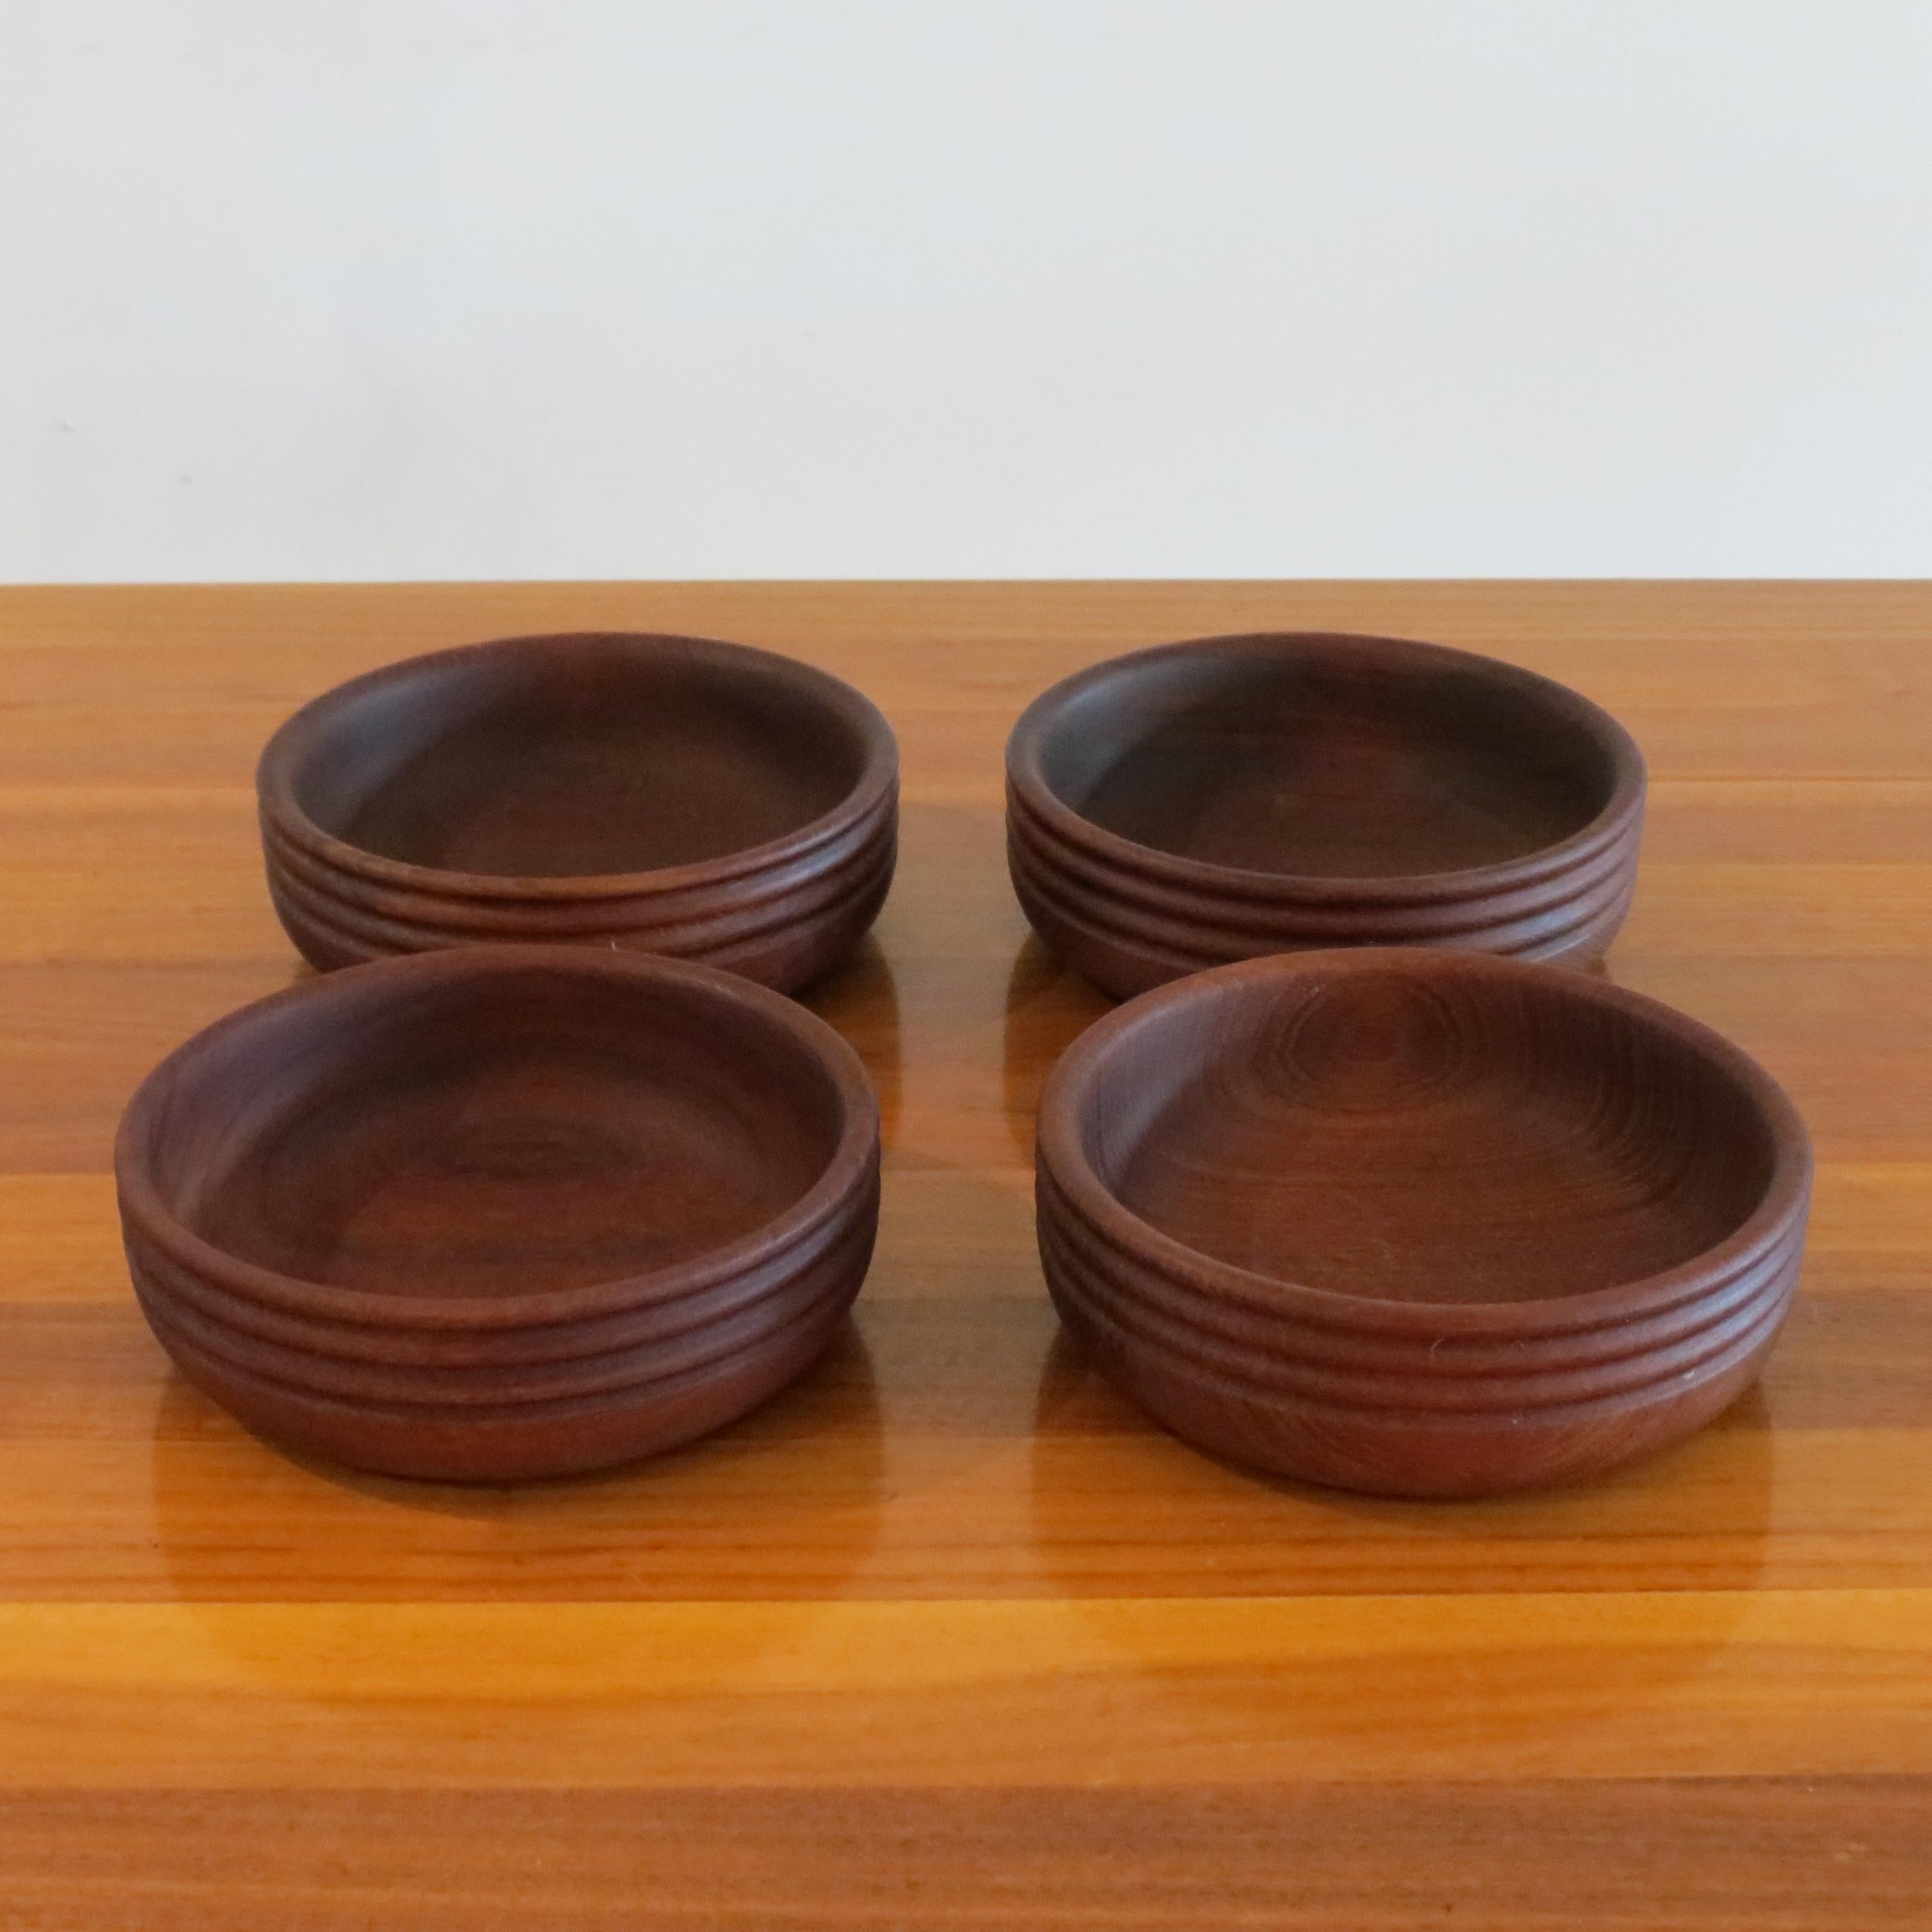 Wonderful set of 4 teak bowls, hand produced by Galatix, England.
Date from the 1960s.
In good condition, very nice turned detail to the outside of each bowl.
Stamped to the underside Galatix Handmade in England Burma Teak
ST1275.
  